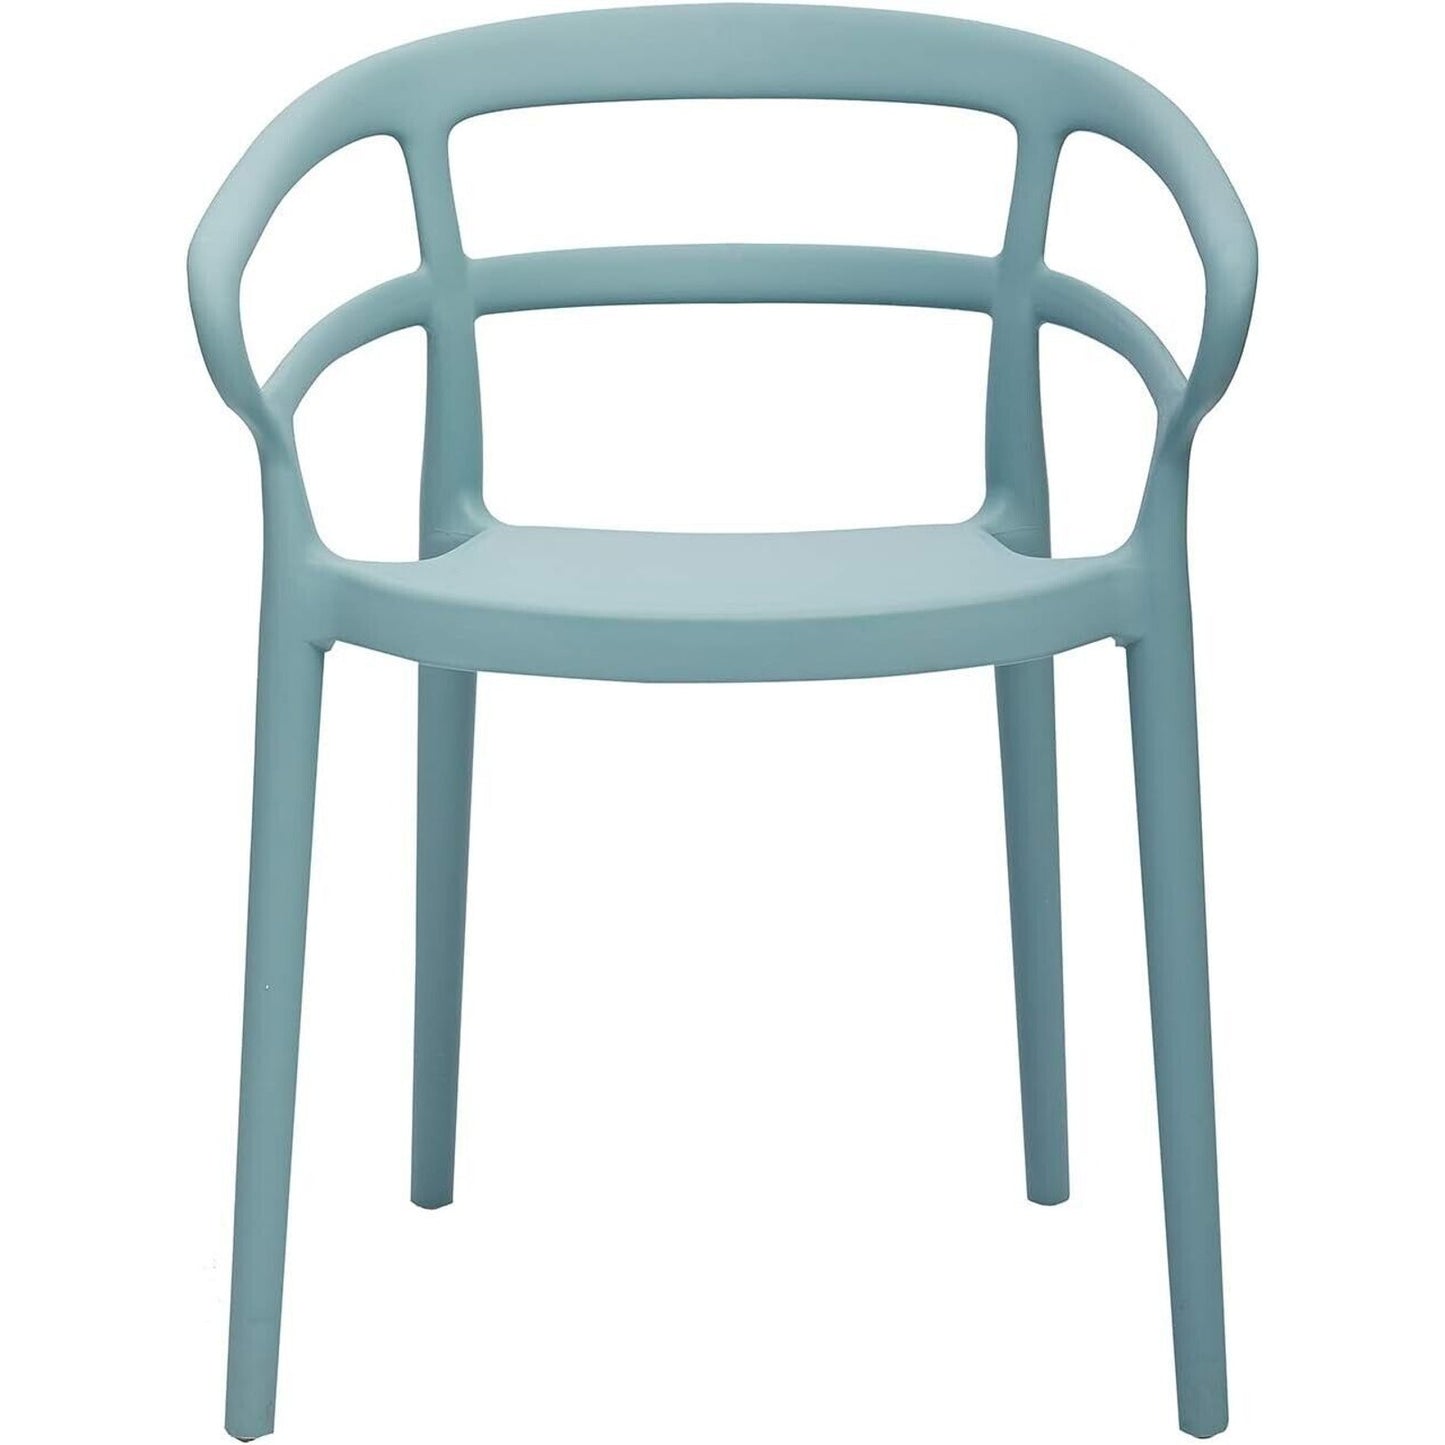 Amazon Basics Curved Back Dining Chairs, Set of 2, Indoor/Outdoor, Light Blue